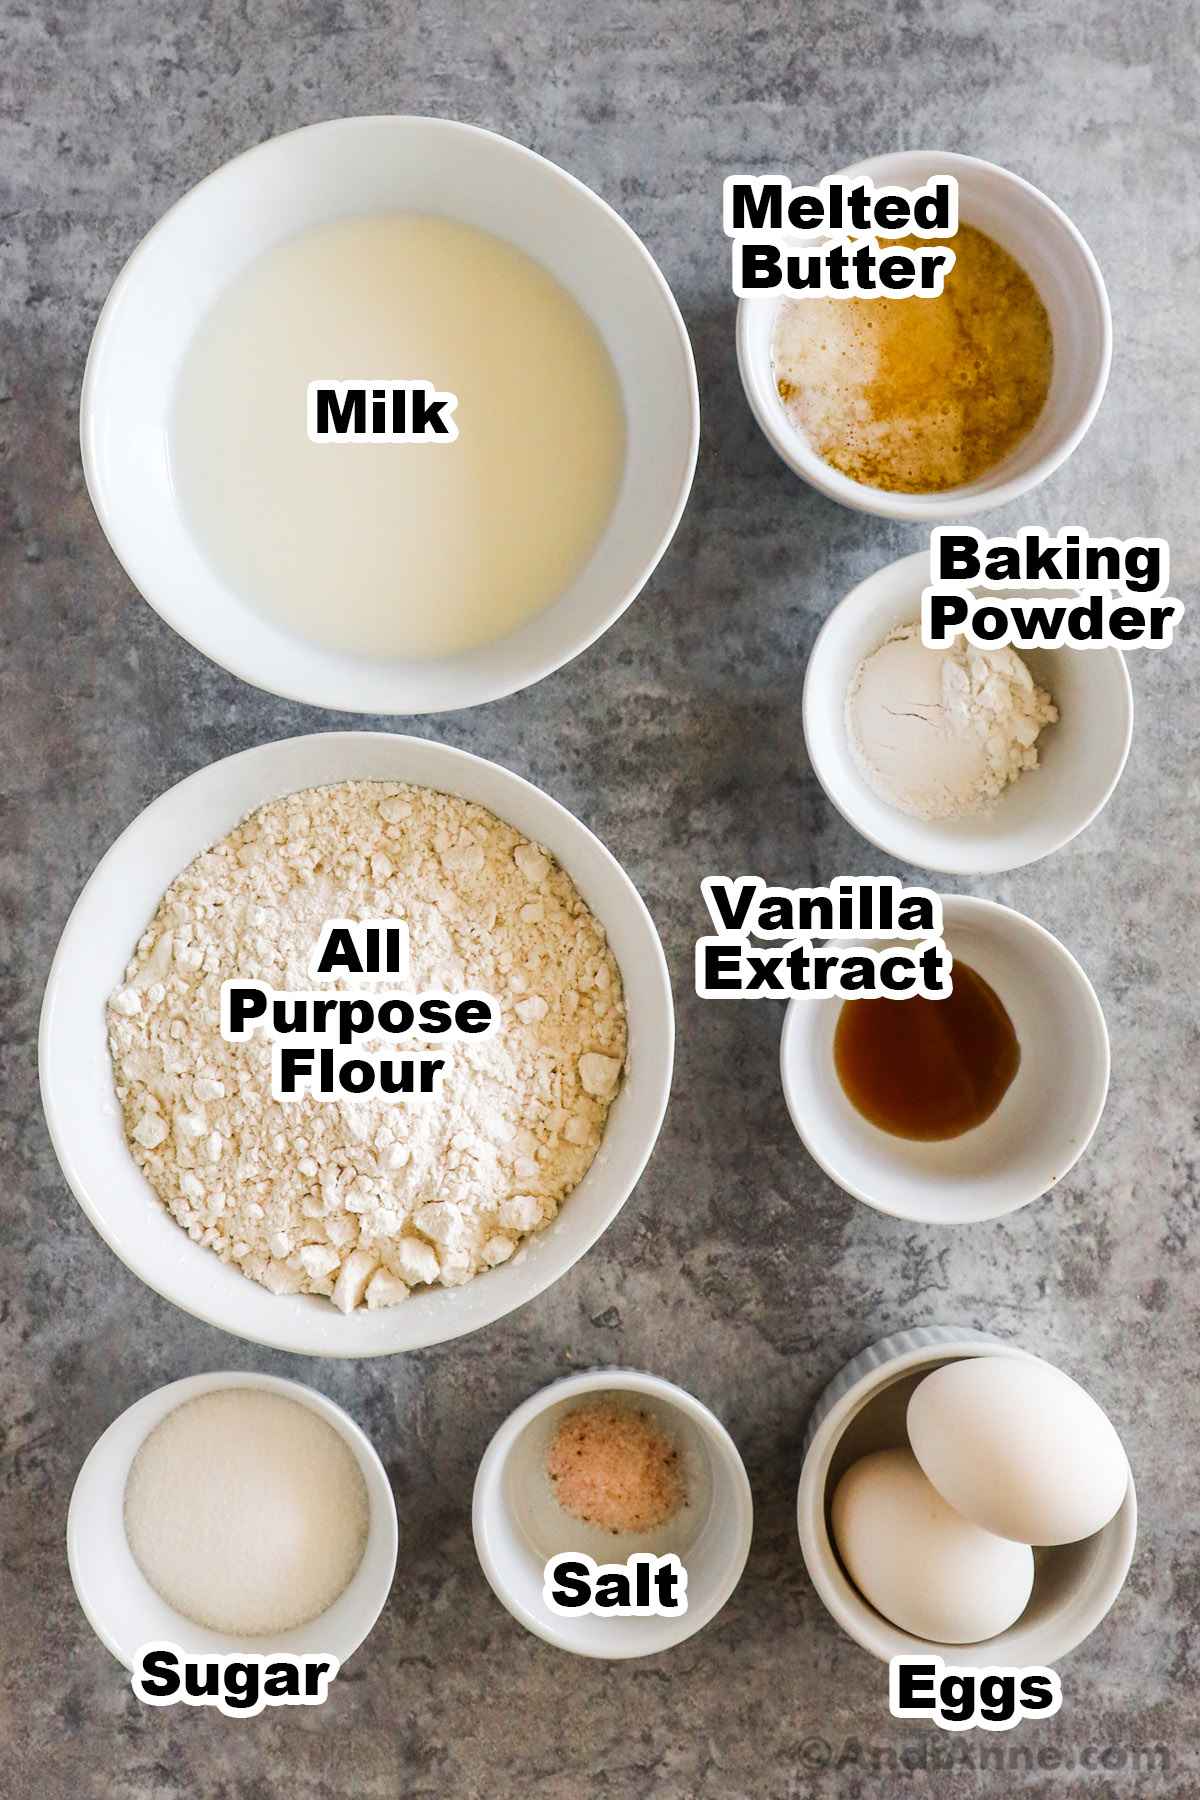 Recipe ingredients on the counter including bowls of milk, melted butter, flour, vanilla, sugar, salt and eggs.